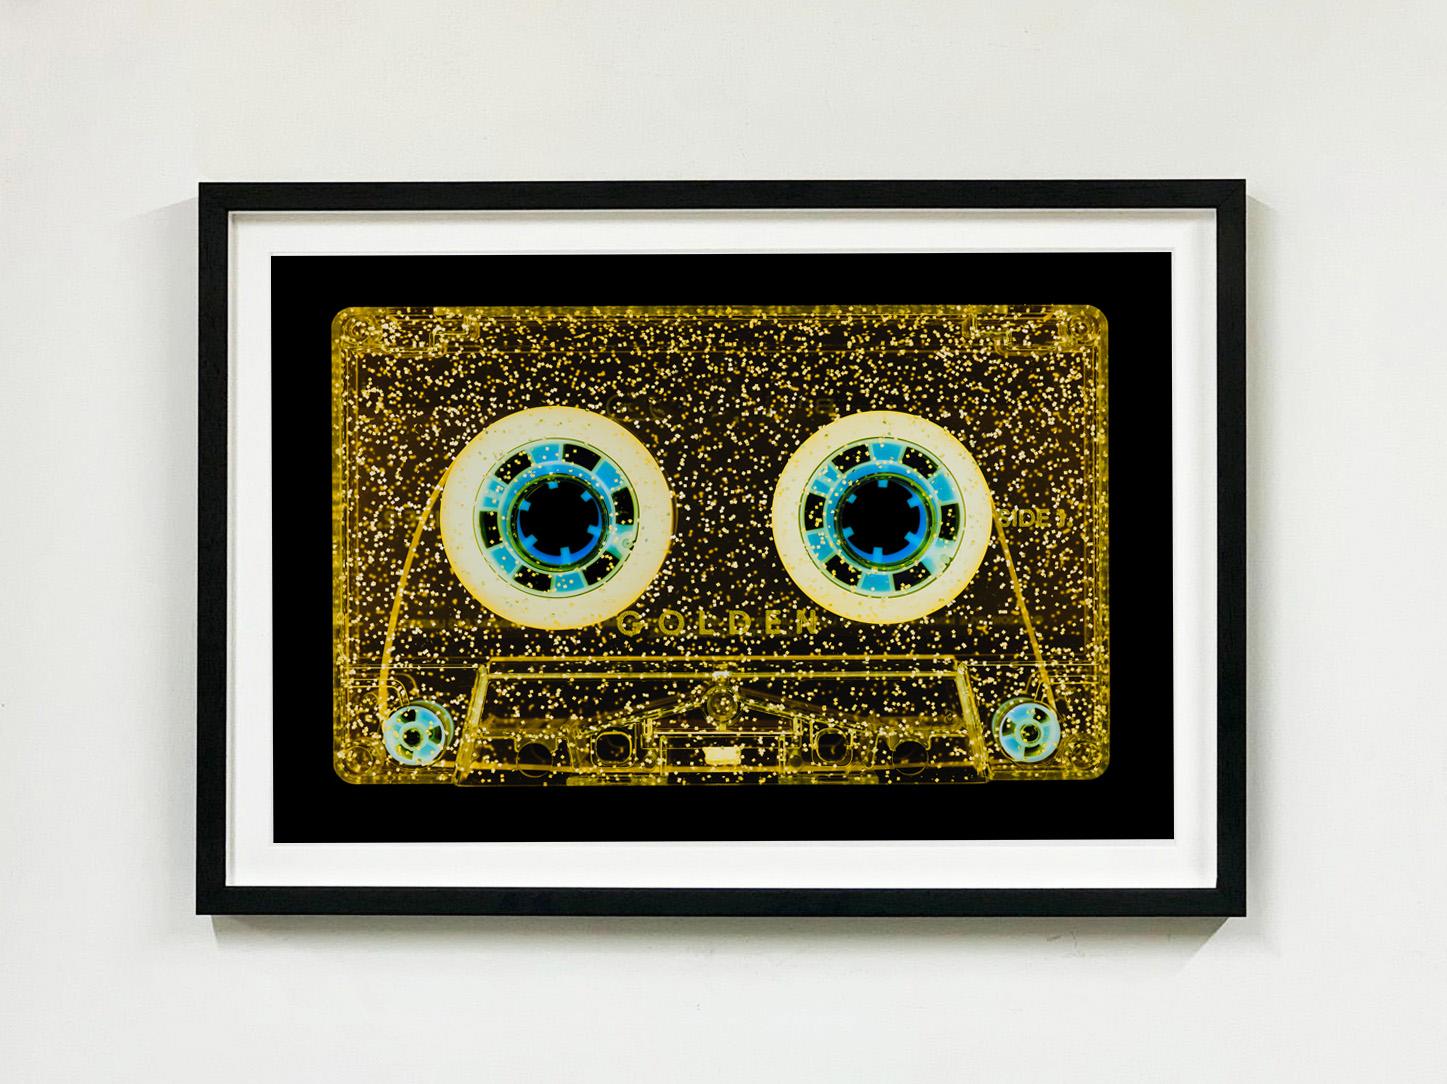 Tape Collection, All That Glitters is Golden - Pop Art Photography - Black Color Photograph by Heidler & Heeps